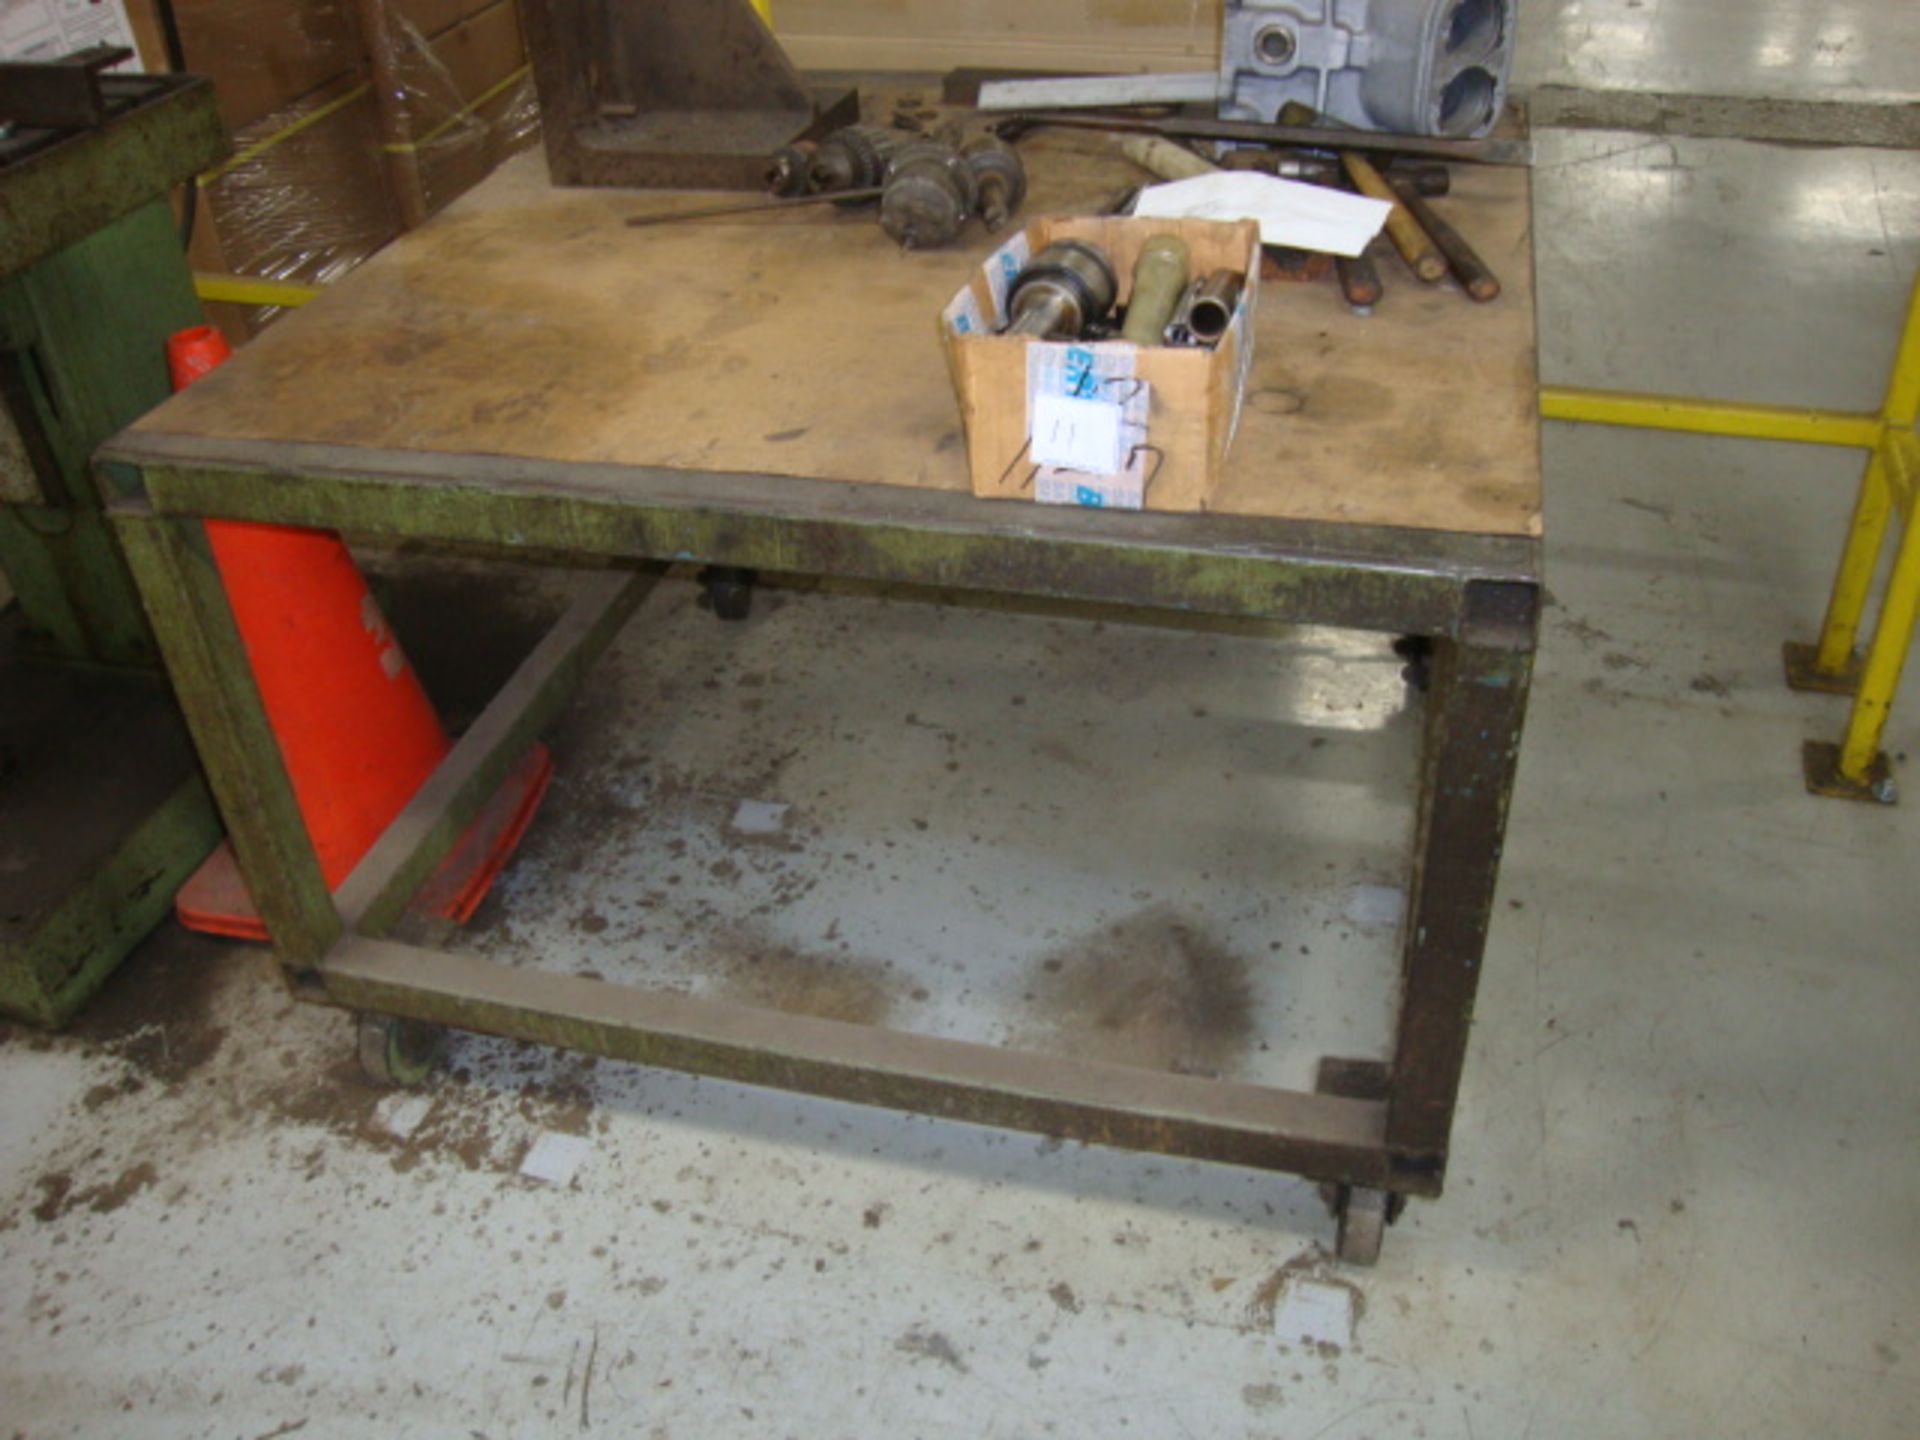 HD Mobile Steel Workbench, NO contents, approx. 44" x 44" x 30" tall